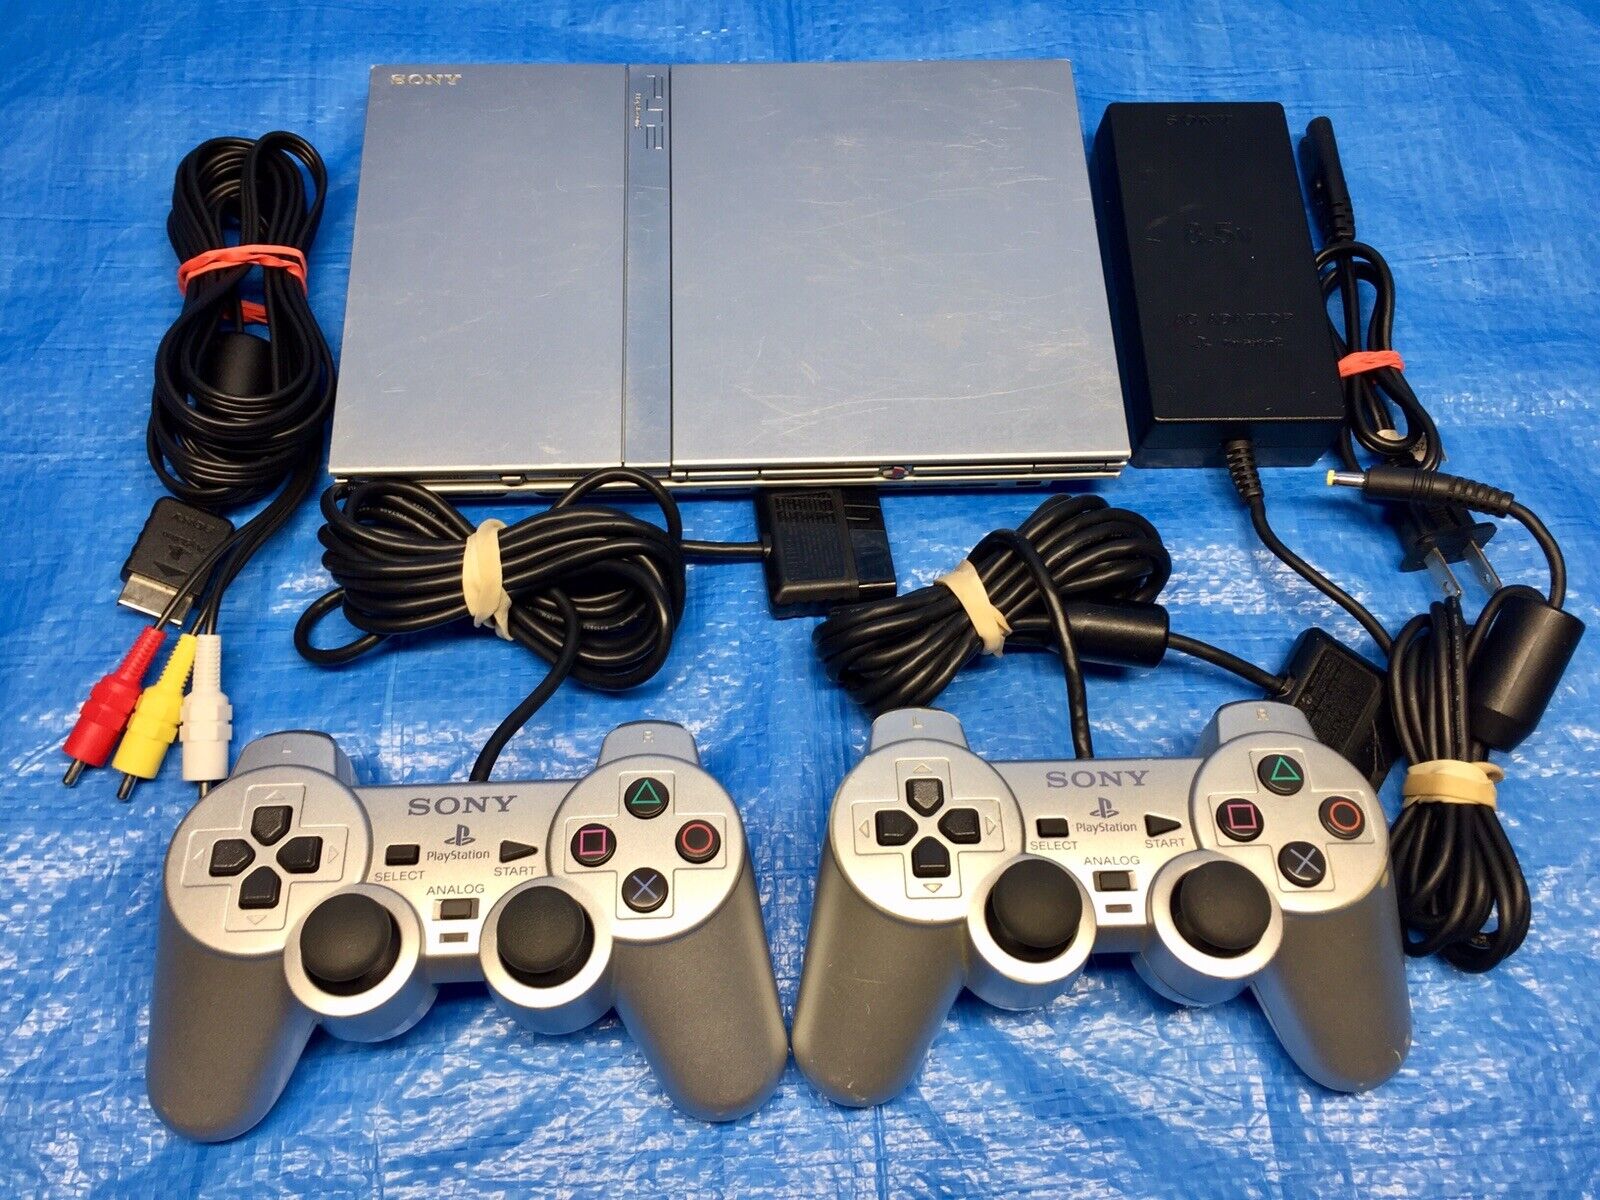 Sony PlayStation 2 Slim Silver Console + 2 PS2 Silver Controllers + 711719657675 | eBay